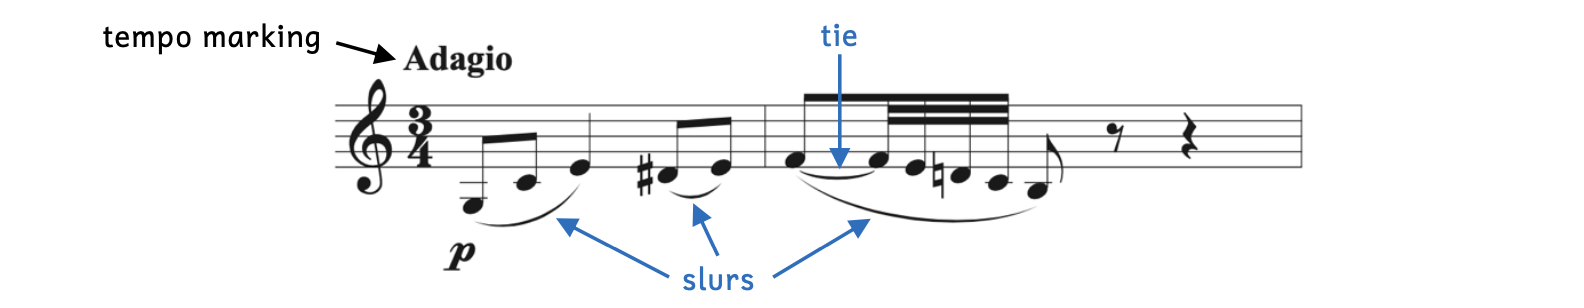 There are three slurs. The third slur has a tie embedded within it. On the top left corner, there is a tempo marking labeled Adagio.